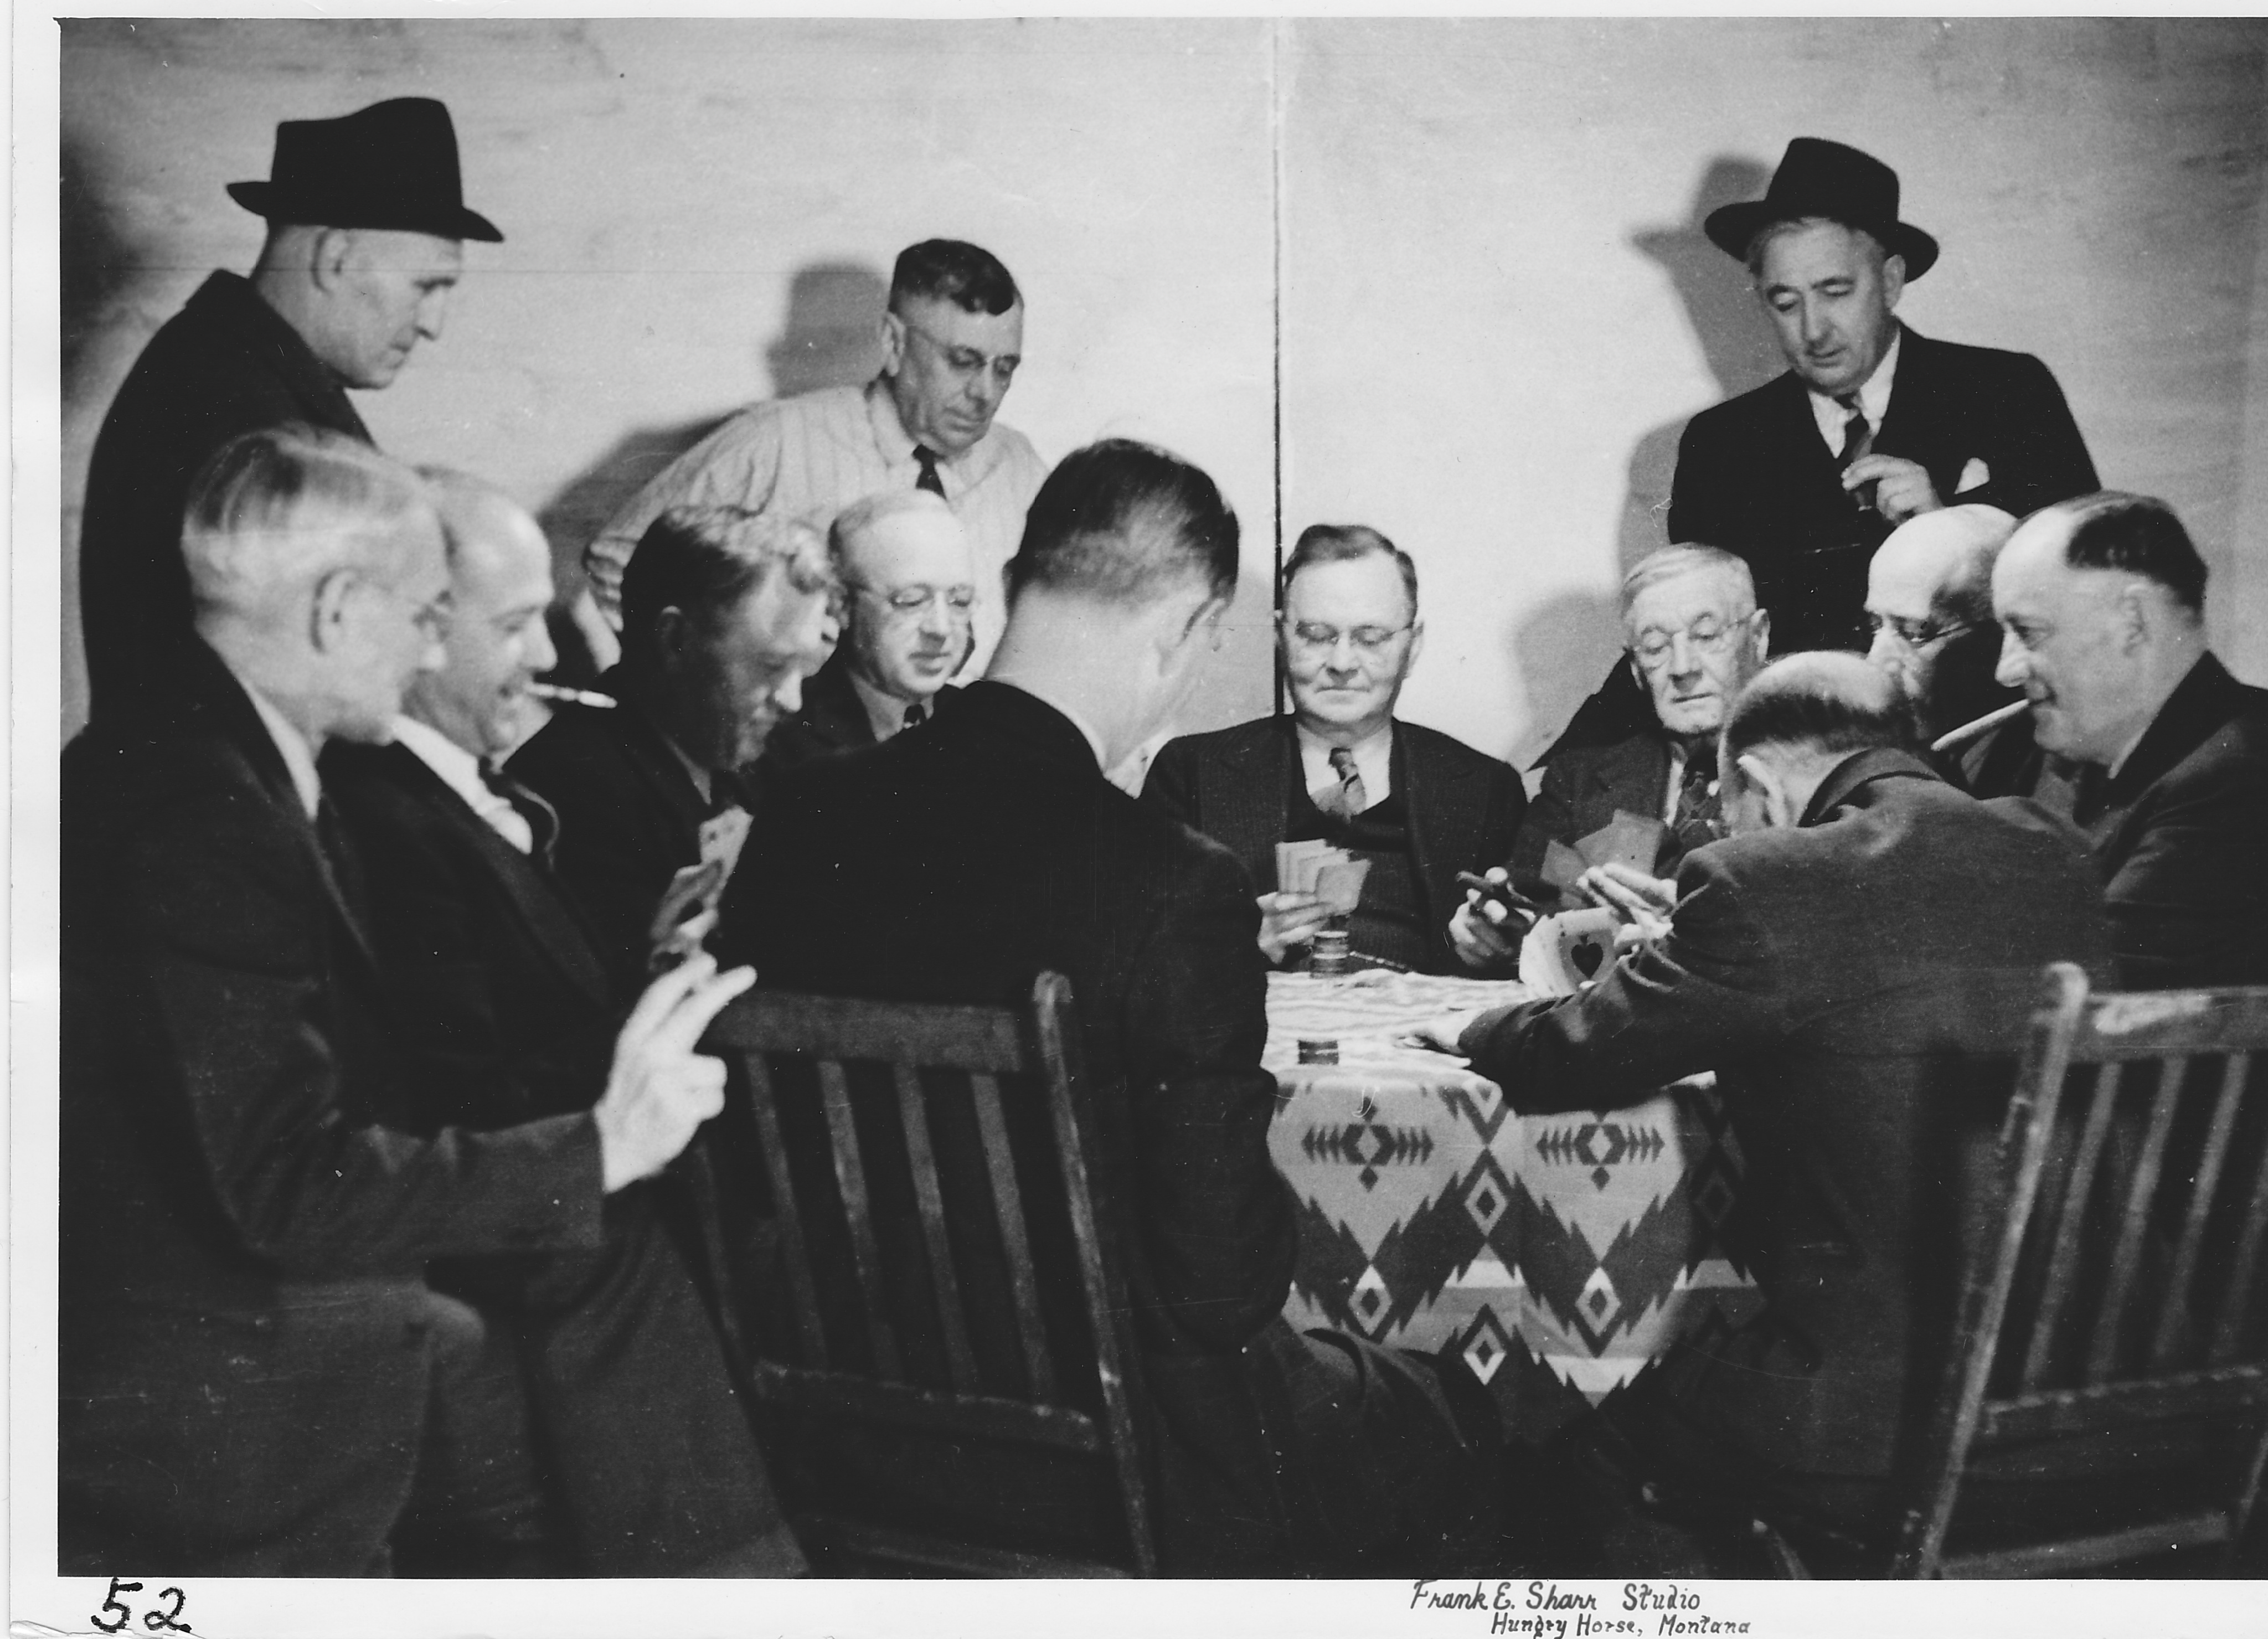 Poker Club. L-r clockwise. – Leon Knox, Marvin Clark, Clare Fauver (standing), Charles Figy, Elmer Bringman, Clyde Smith (standing), Dr. J. Monroe, Wm. Rorick, G. H. Gerlach (standing), Clarence Fellows, Martin Swaney, Sam Berlin, Robert Paine.